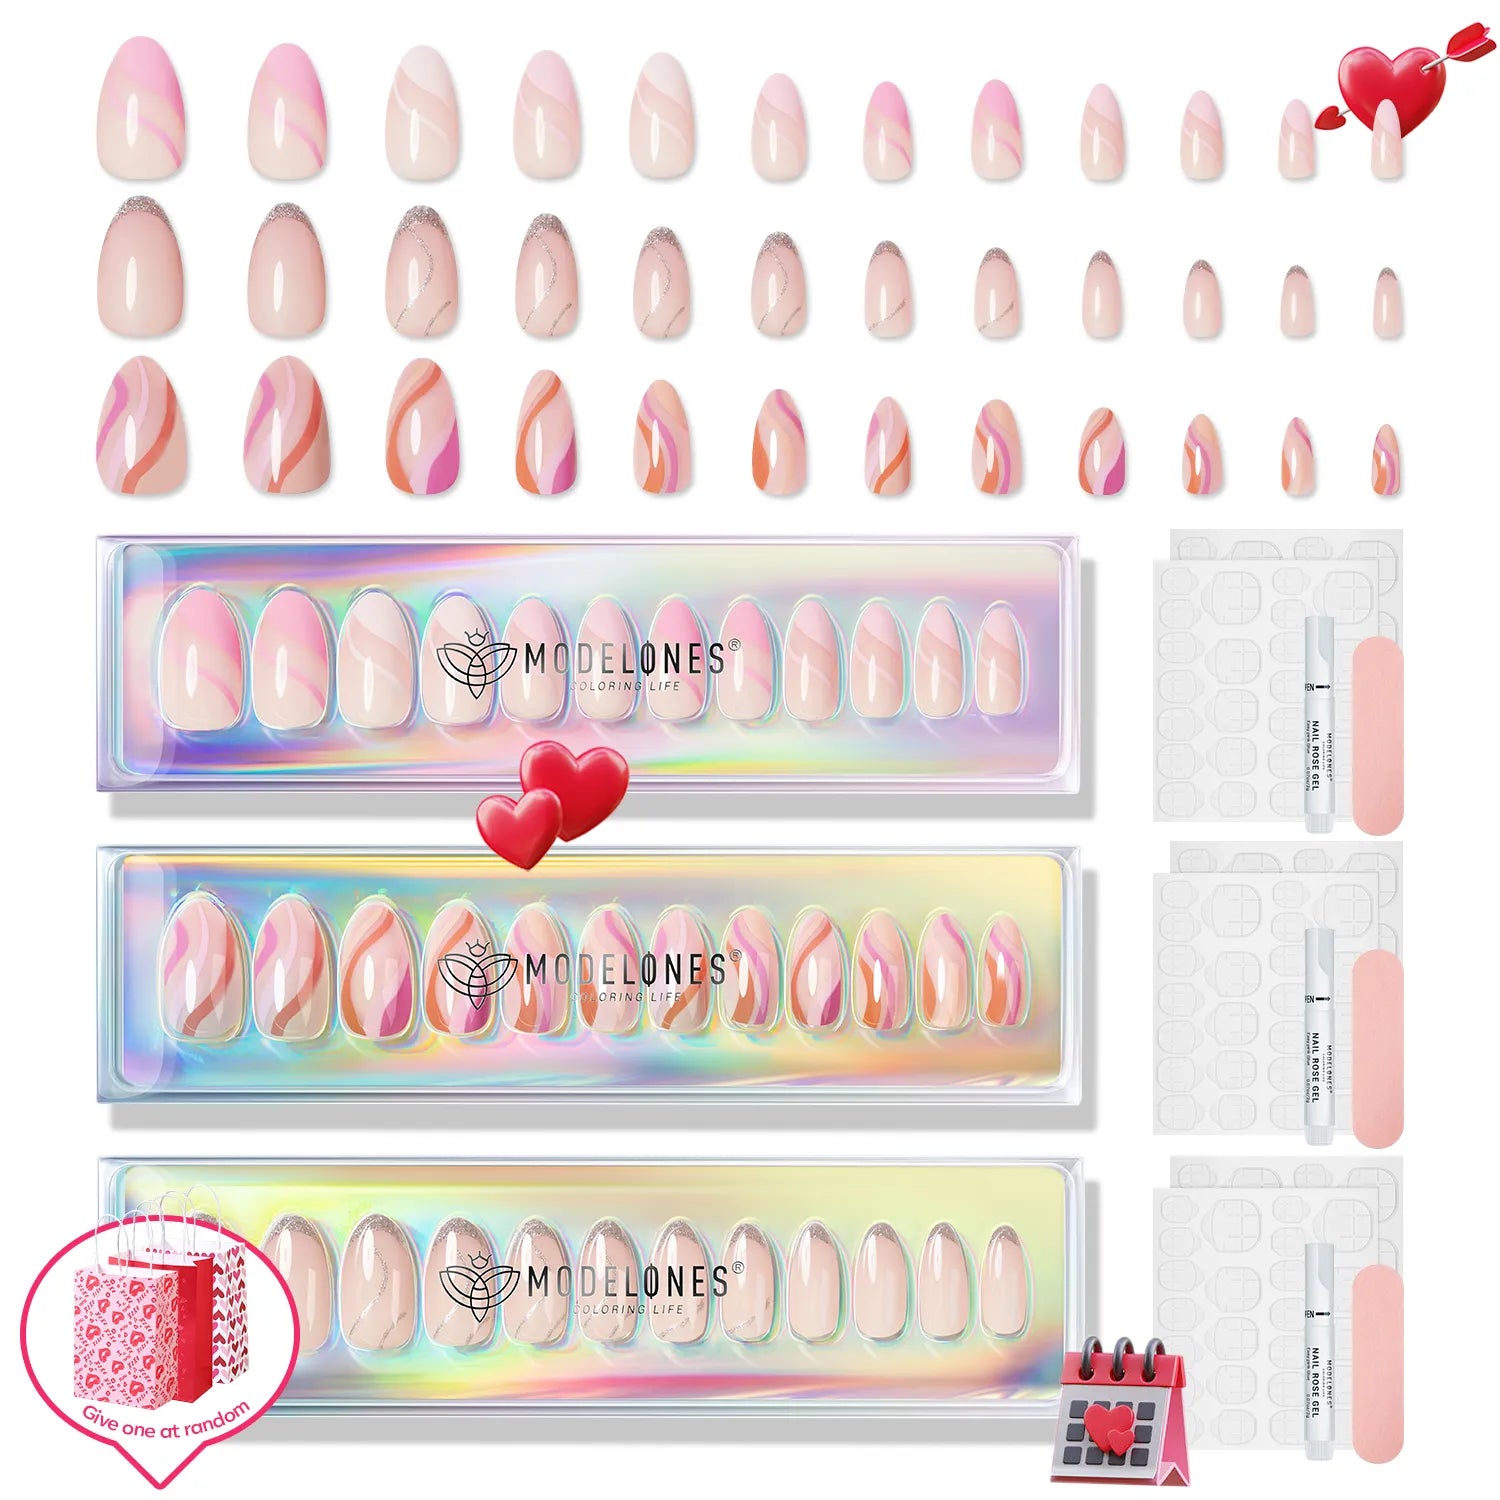 Sweet As You - 72 Fake Nails 12 Sizes Short Coffin Press On Nails Kit